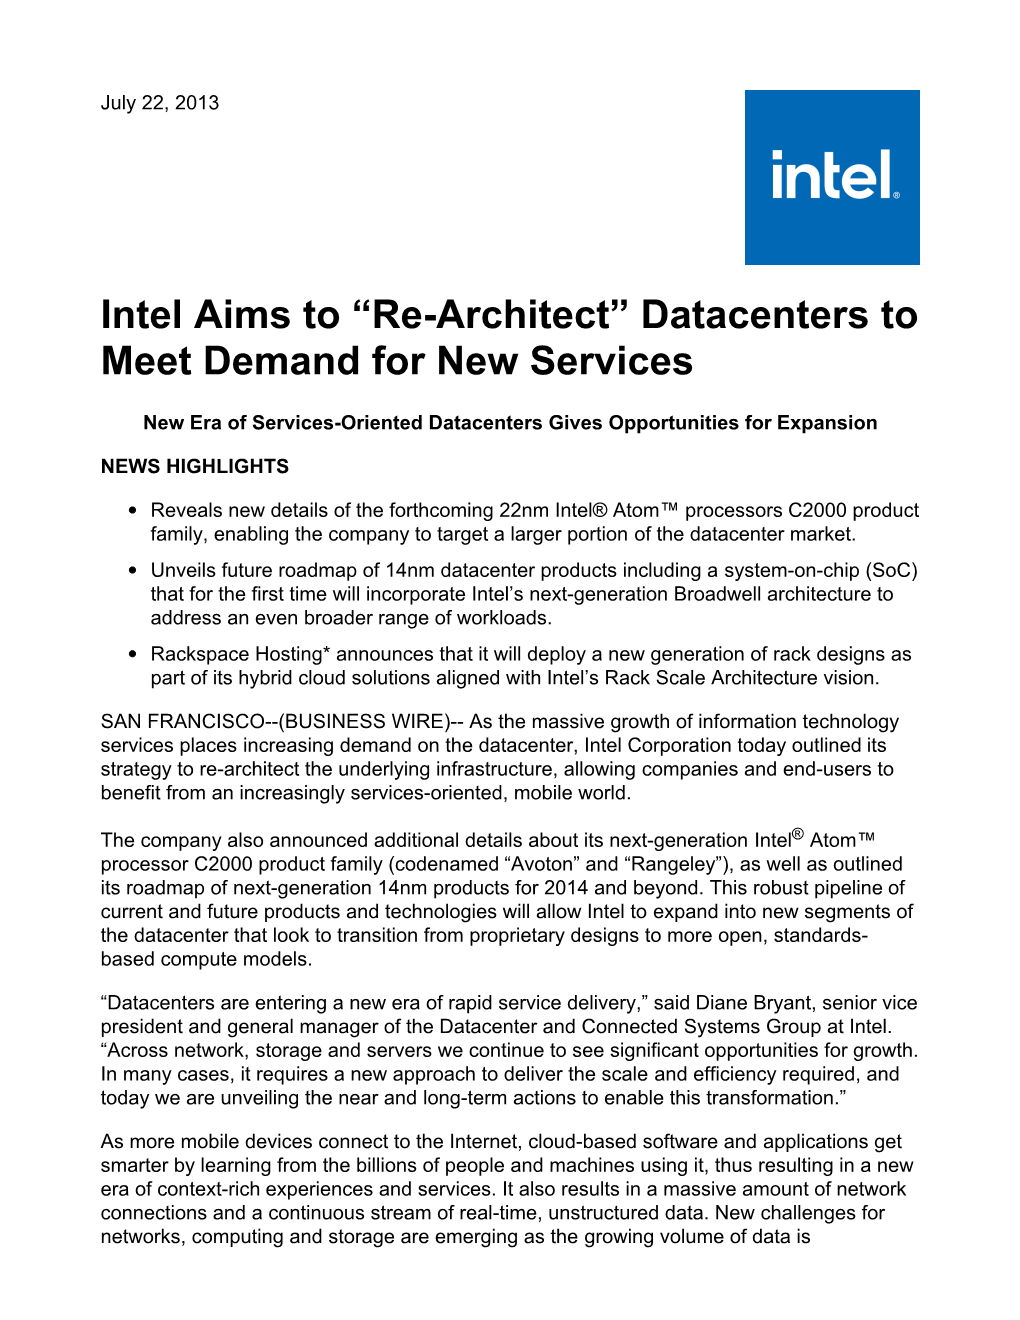 Intel Aims to “Re-Architect” Datacenters to Meet Demand for New Services